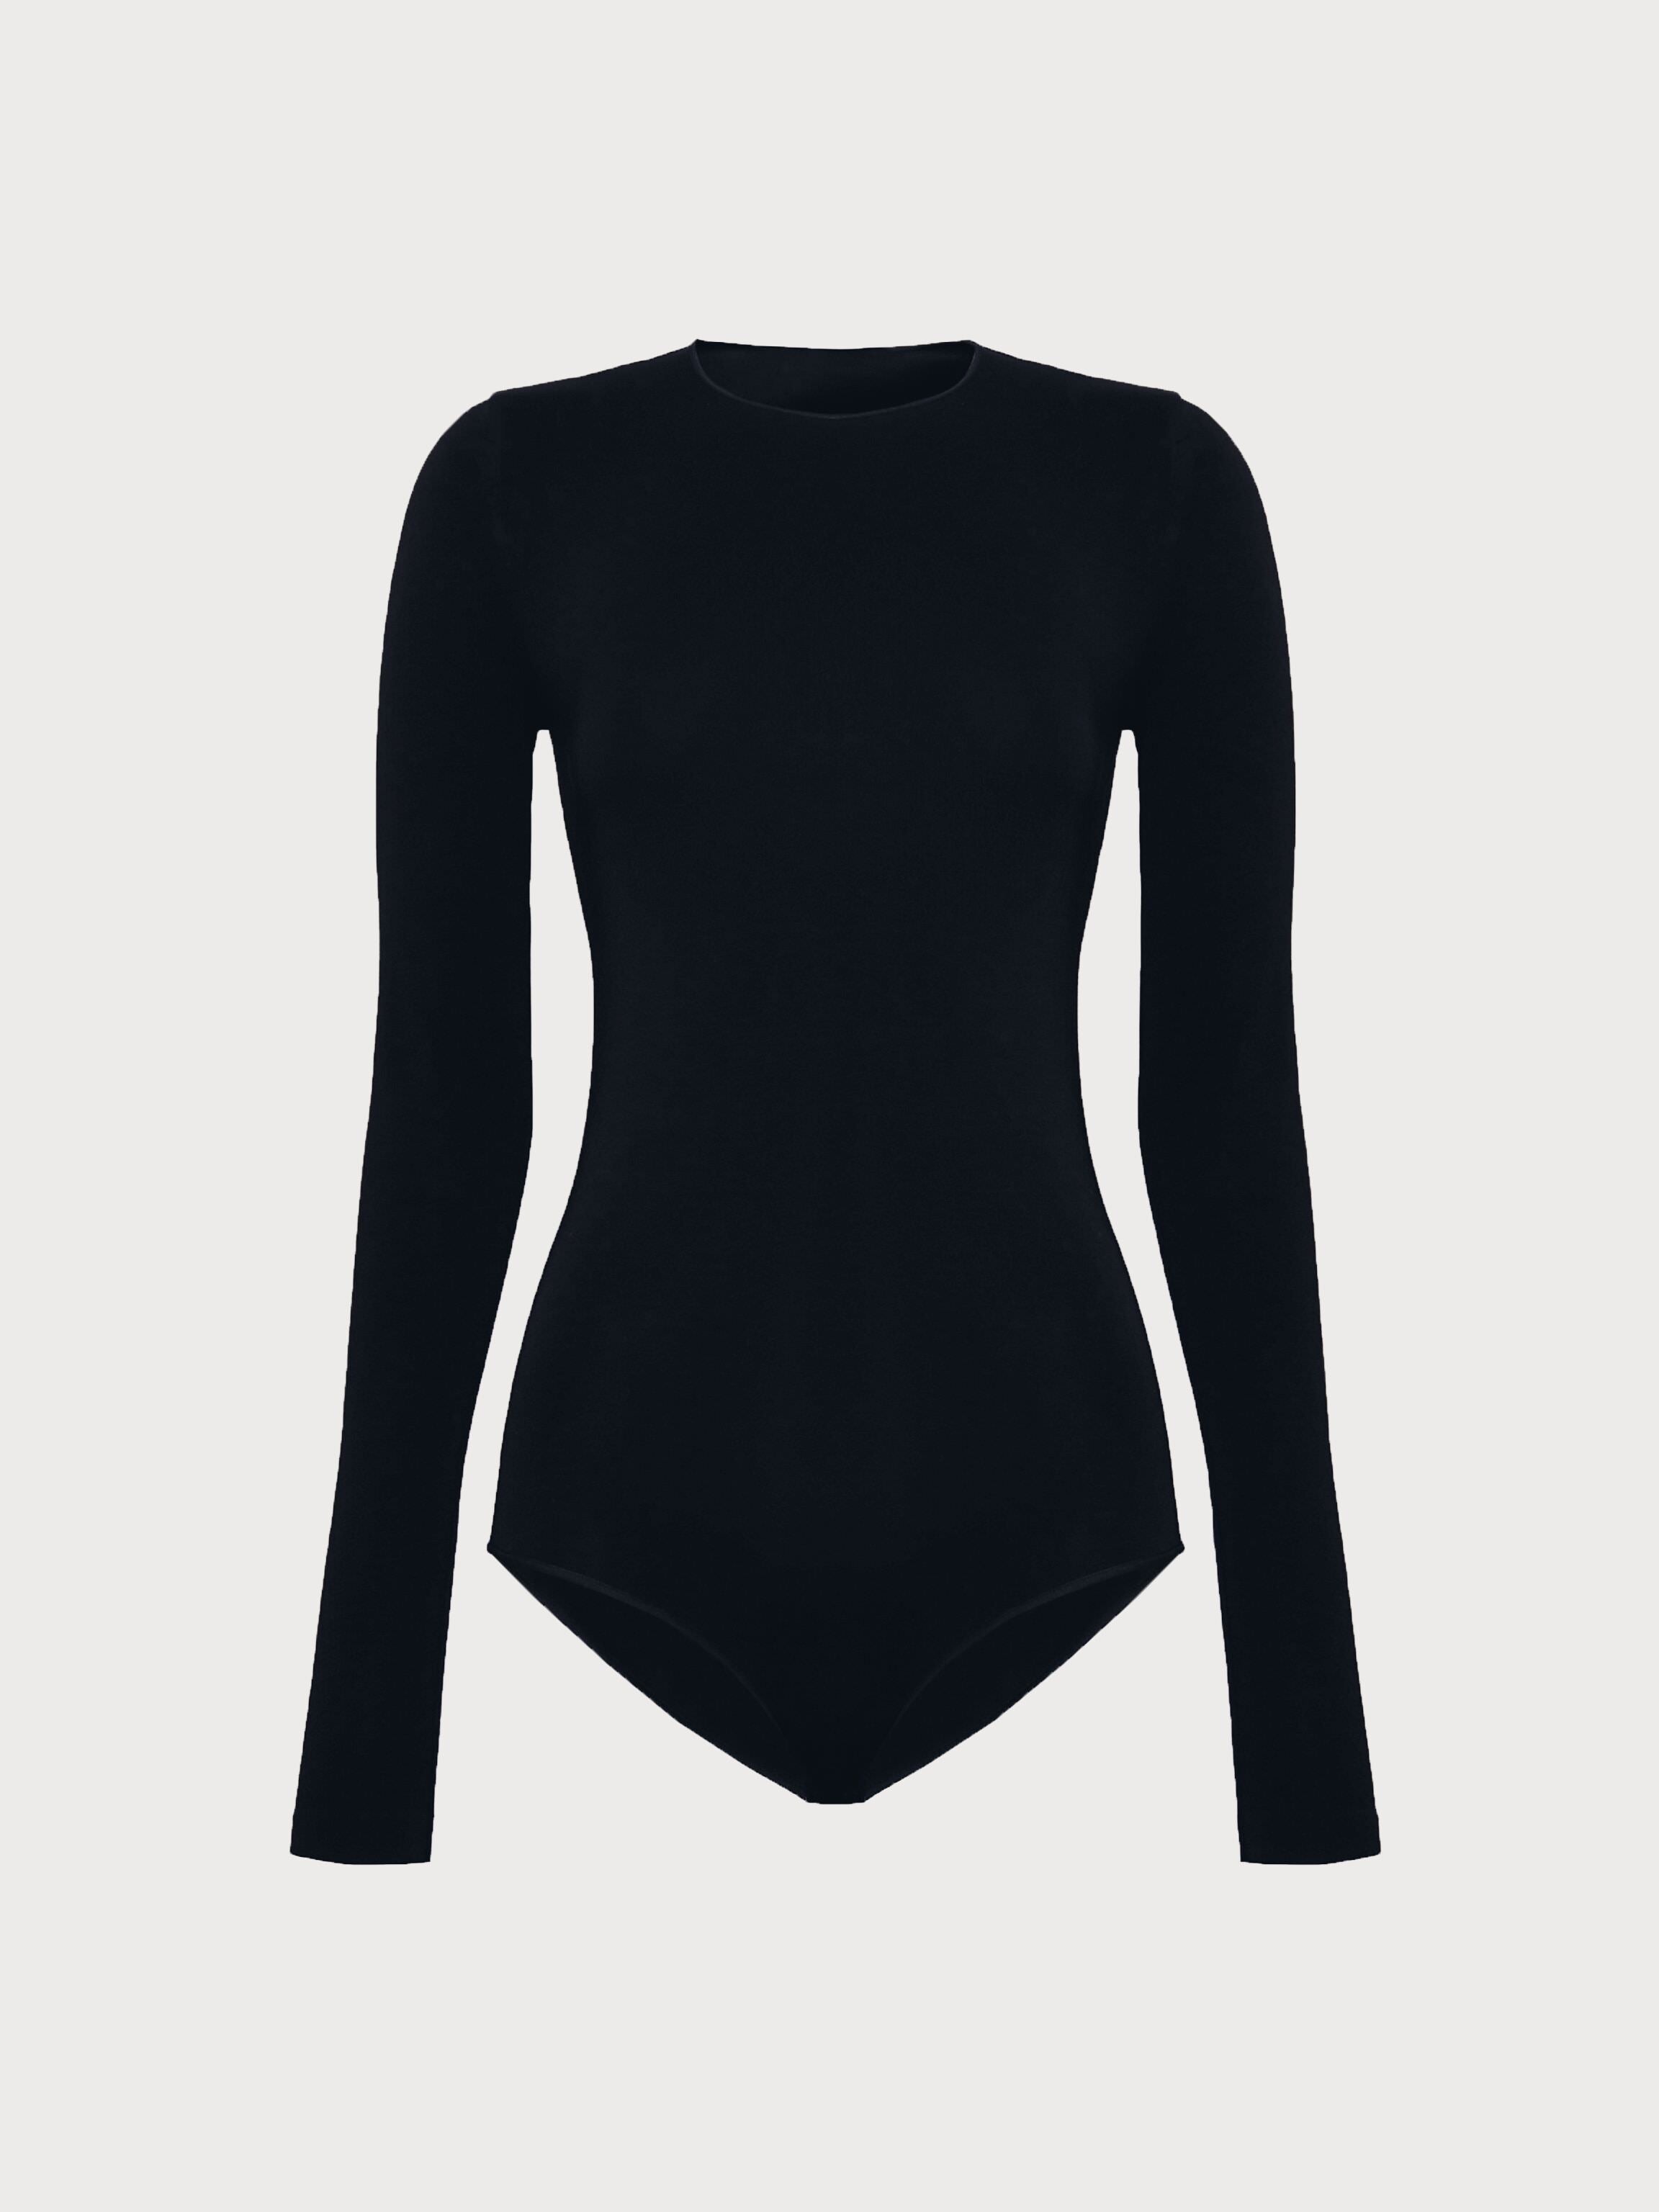 Why Wolford Bodysuits Are an A-List Must-Have